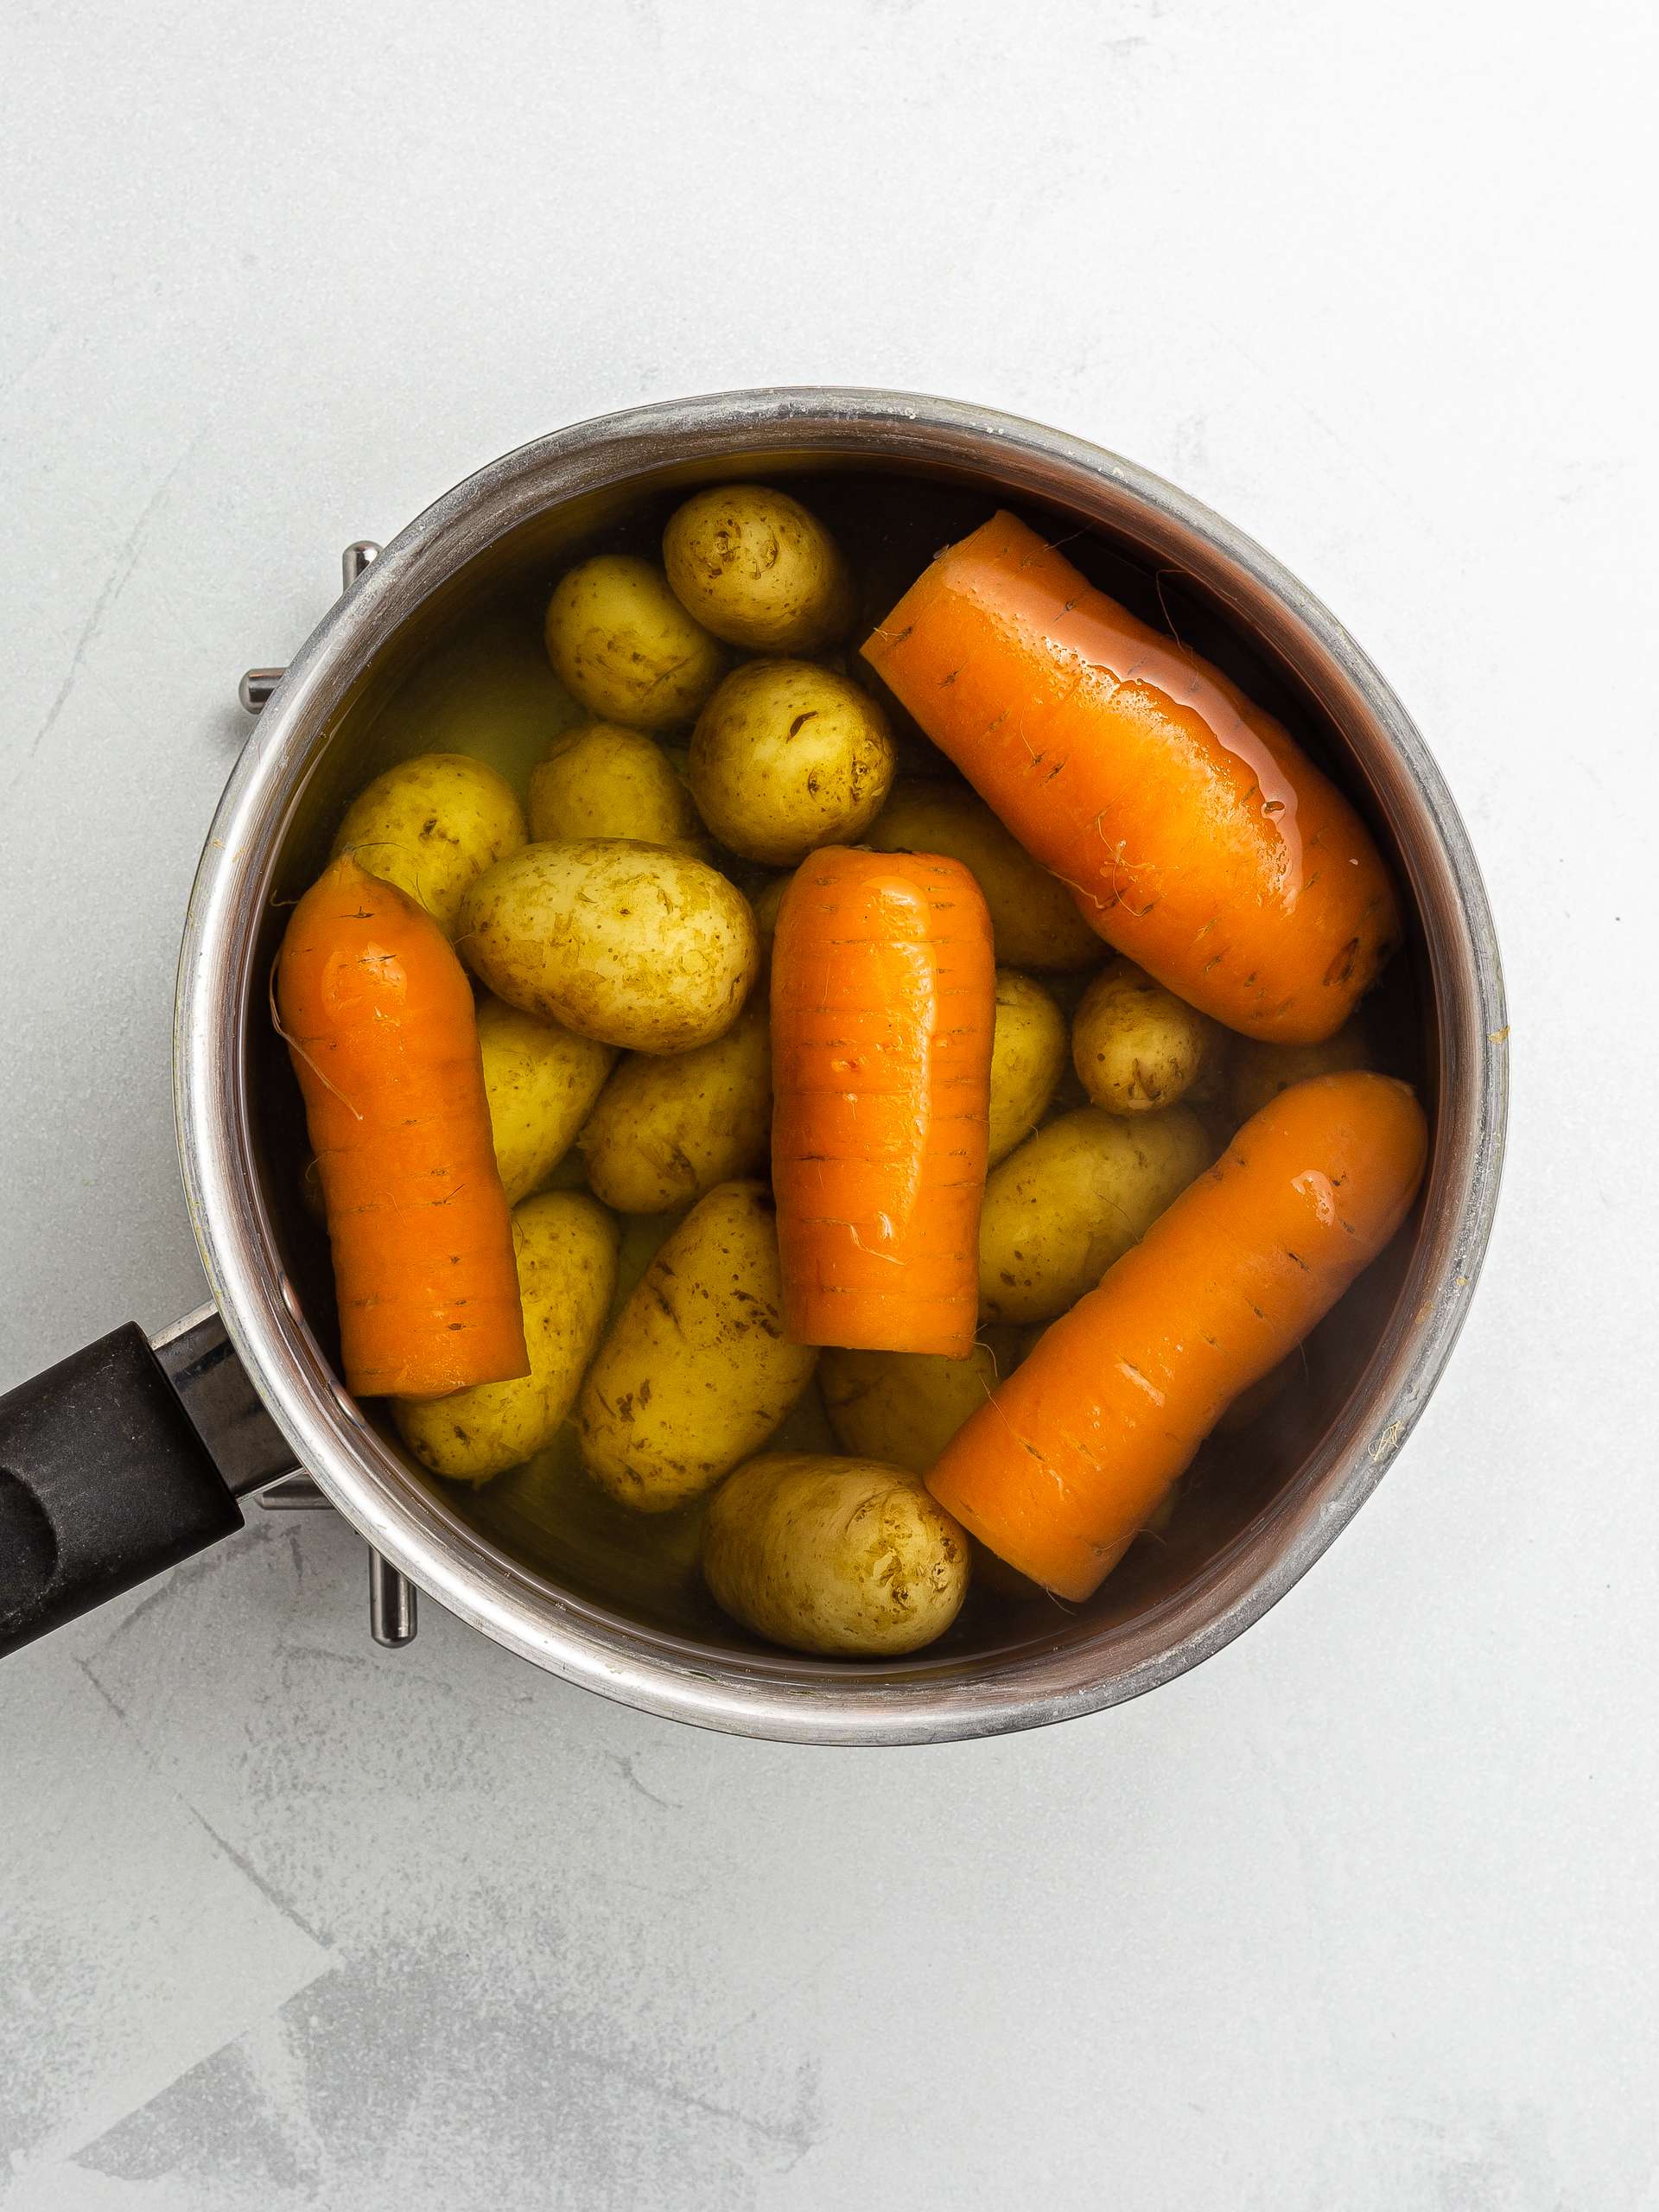 boiled potatoes and carrots